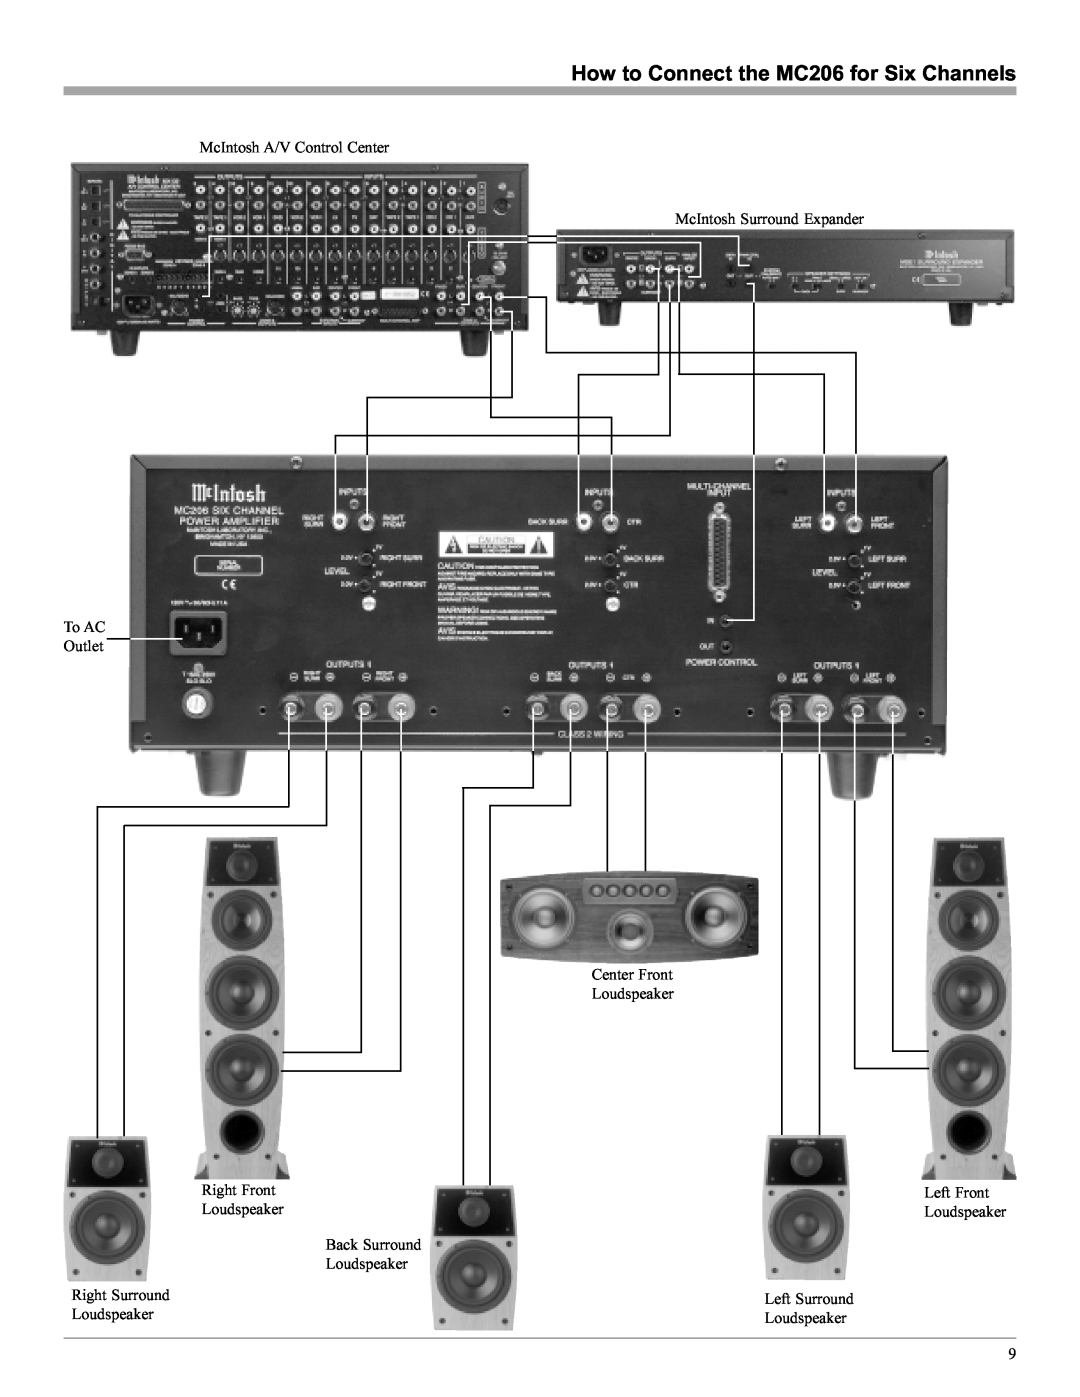 McIntosh manual How to Connect the MC206 for Six Channels, McIntosh A/V Control Center, McIntosh Surround Expander 